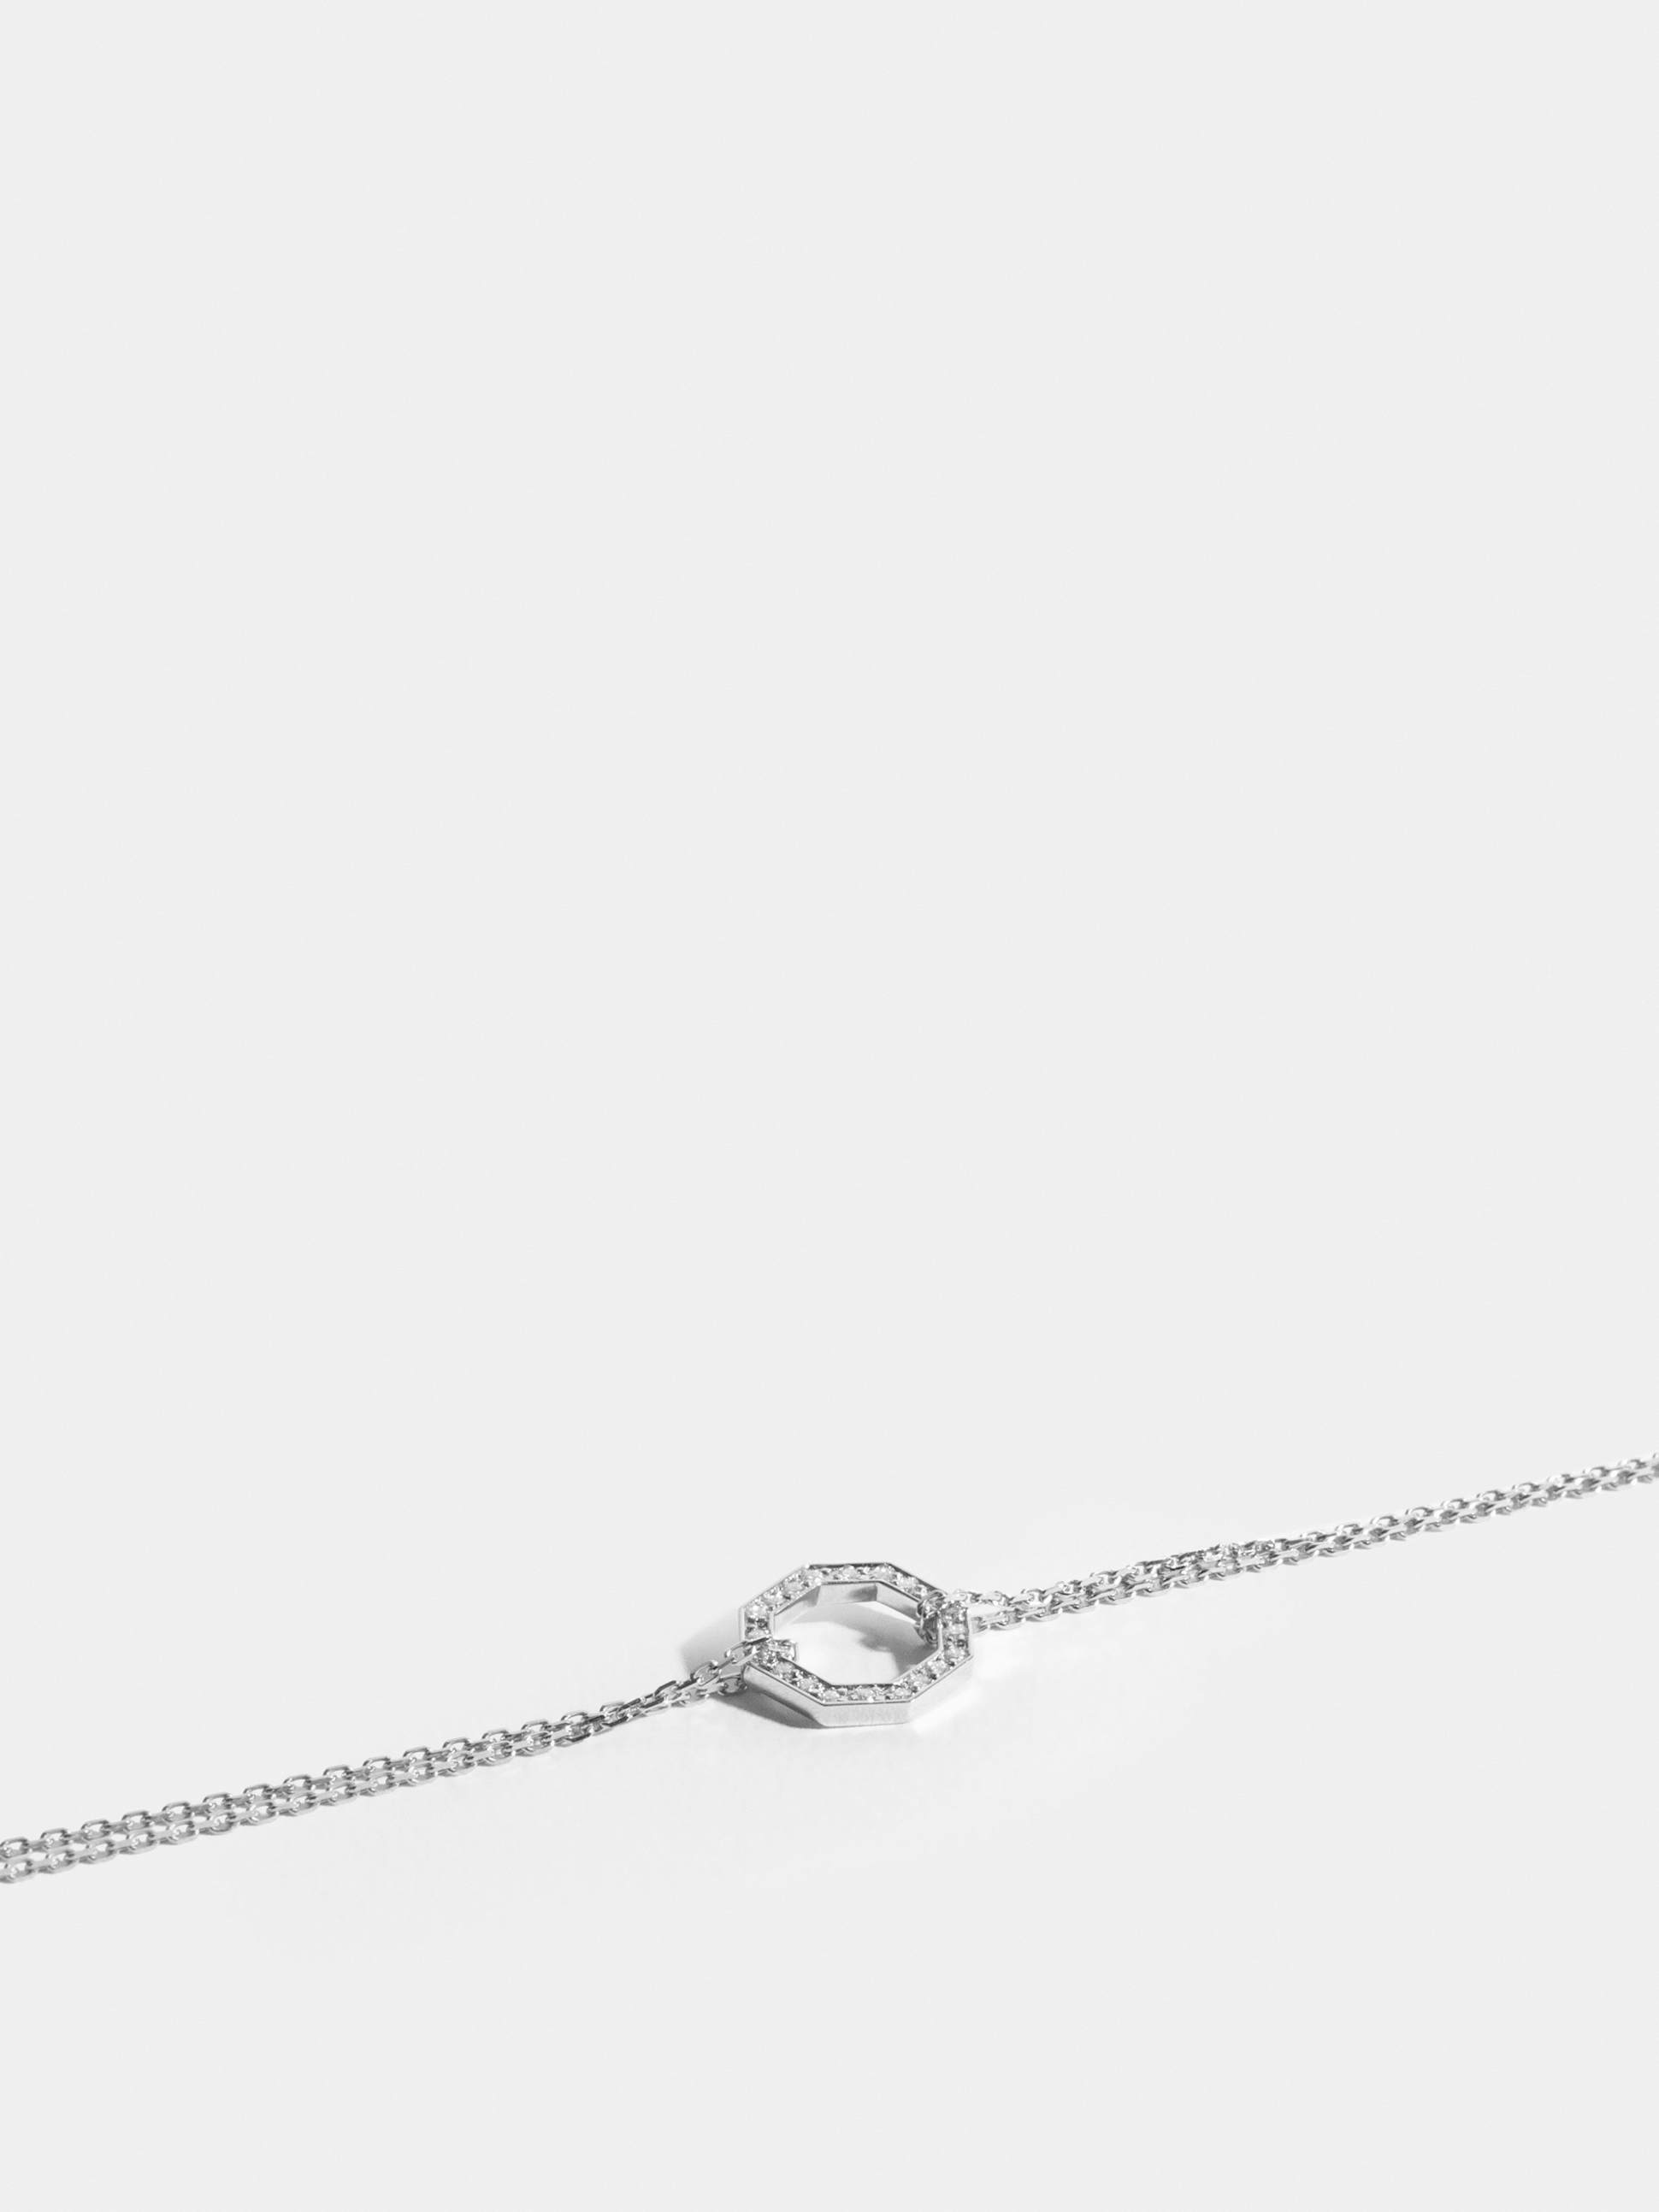 Octogone motif in 18k Fairmined ethical white gold, paved with lab-grown diamonds, on a chain.